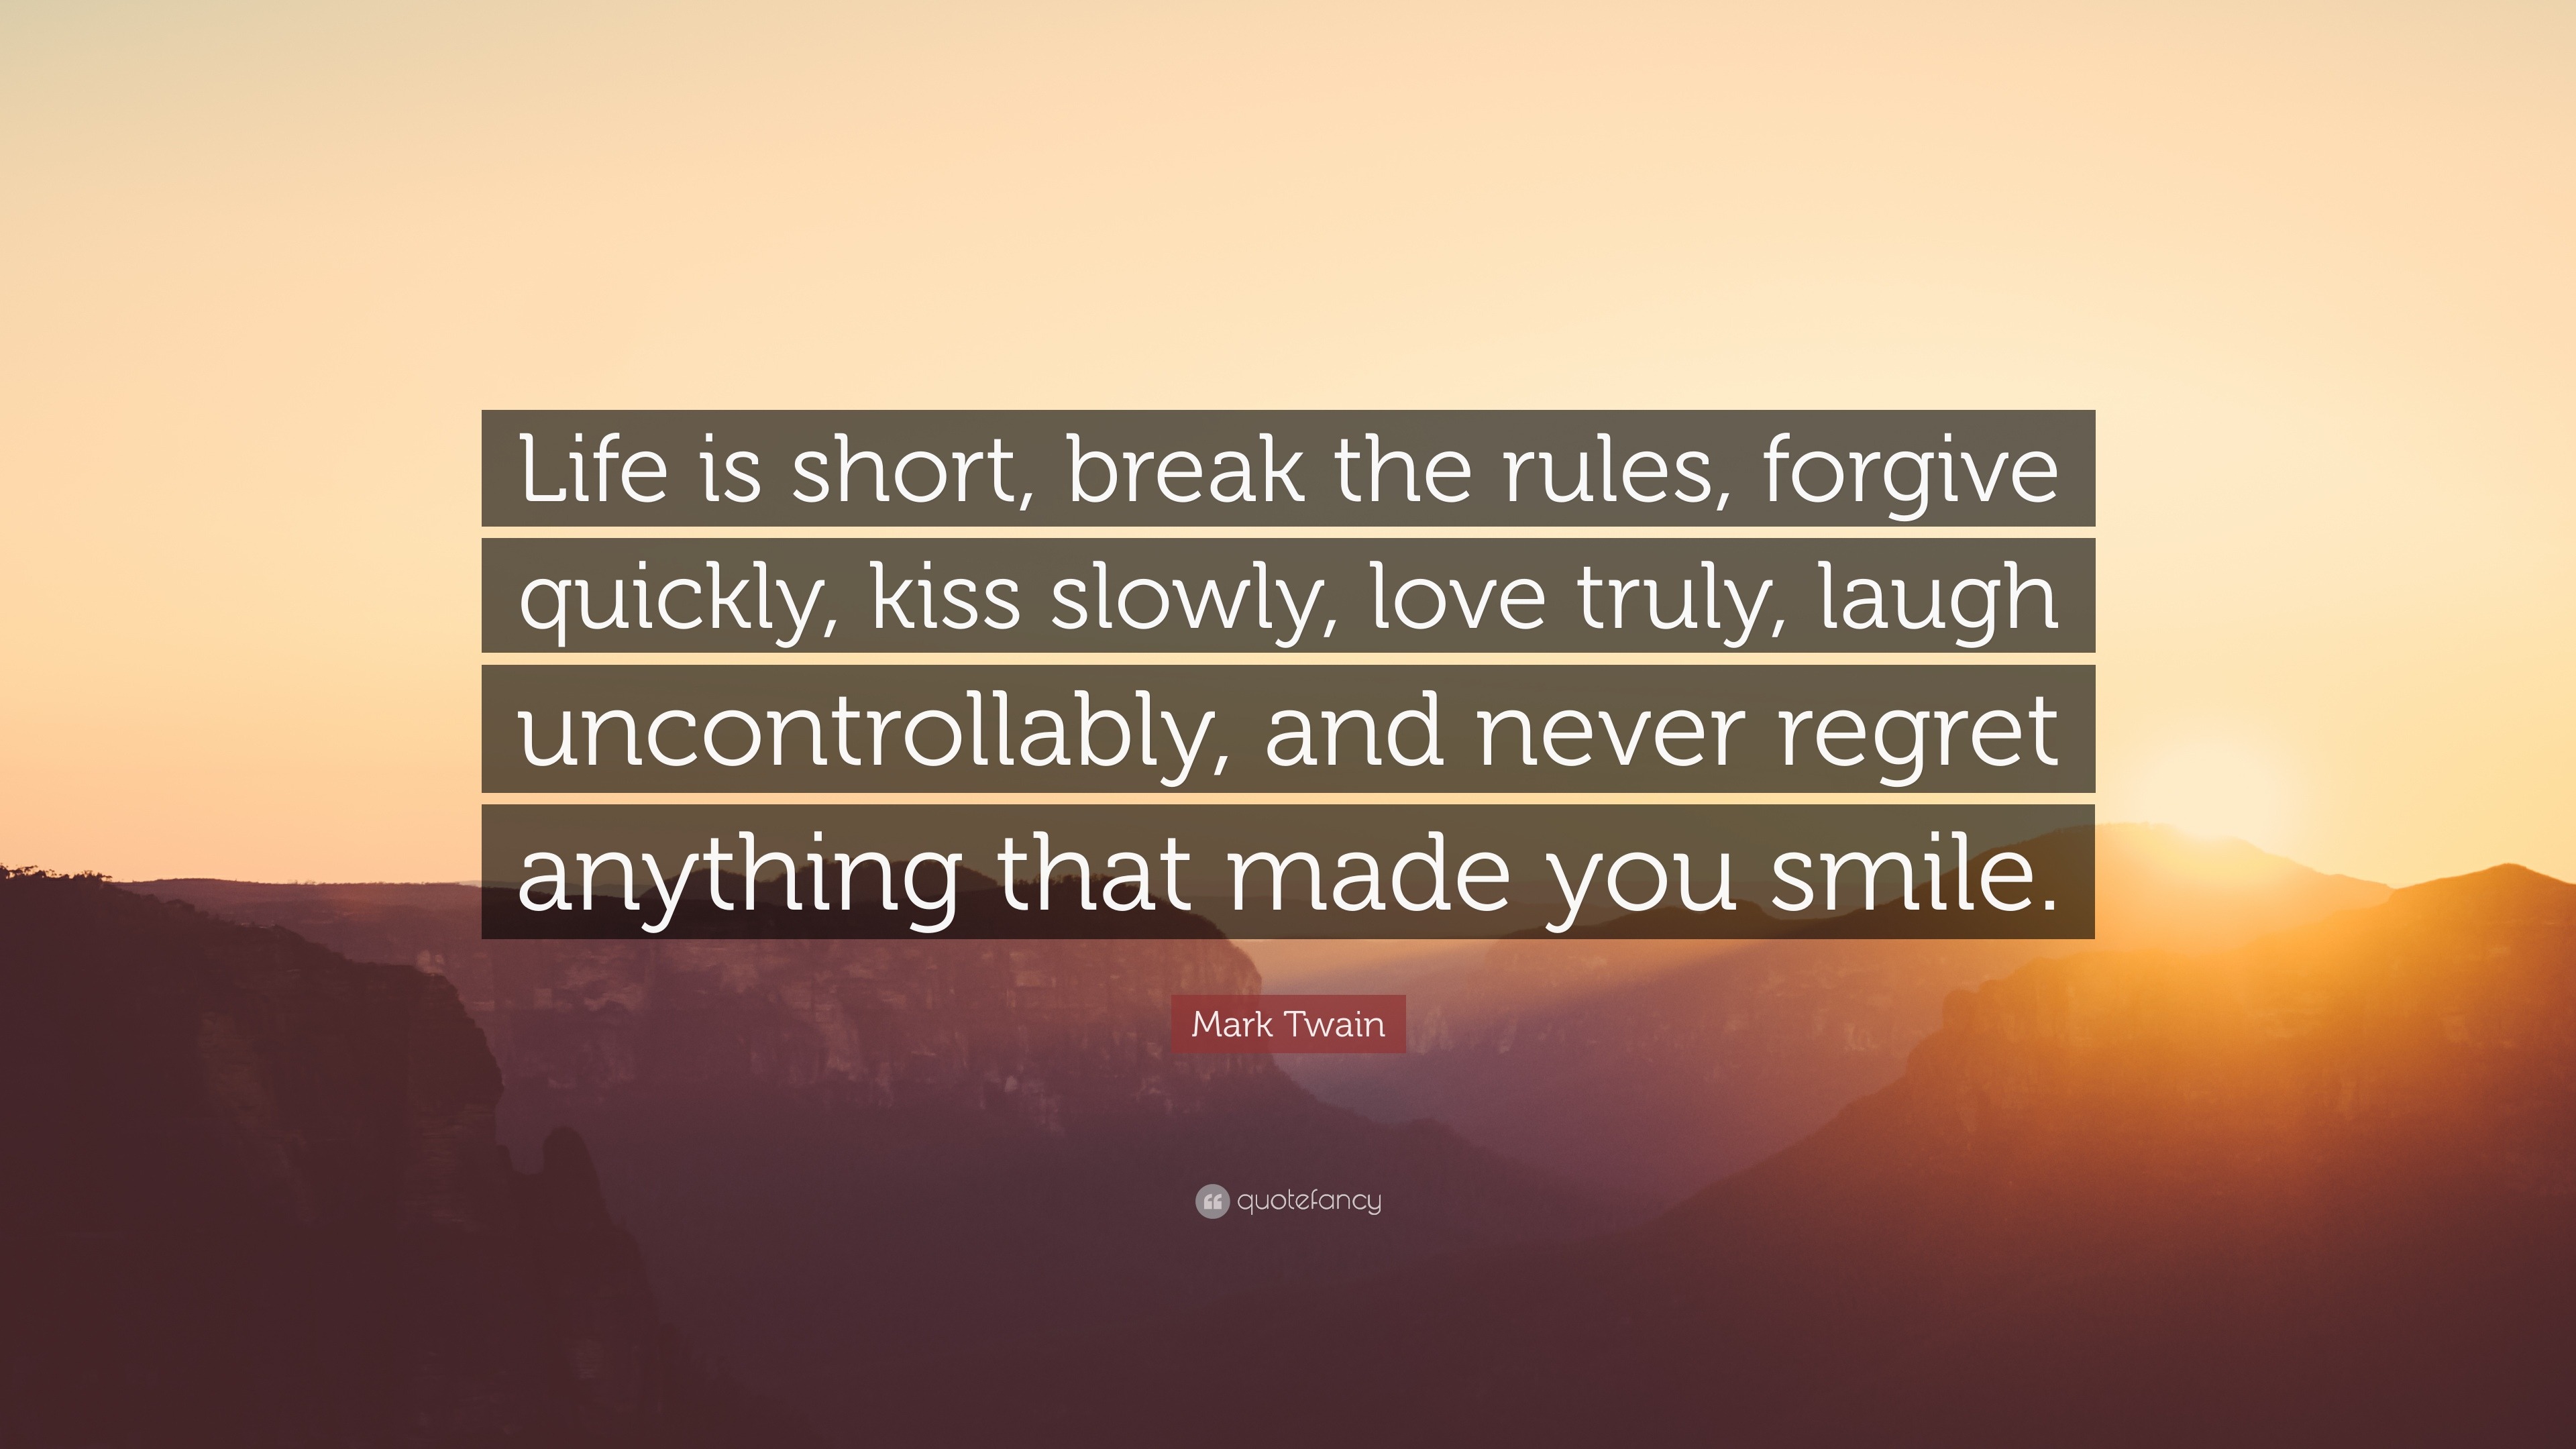 Mark Twain Quote: “Life is short, break the rules, forgive quickly